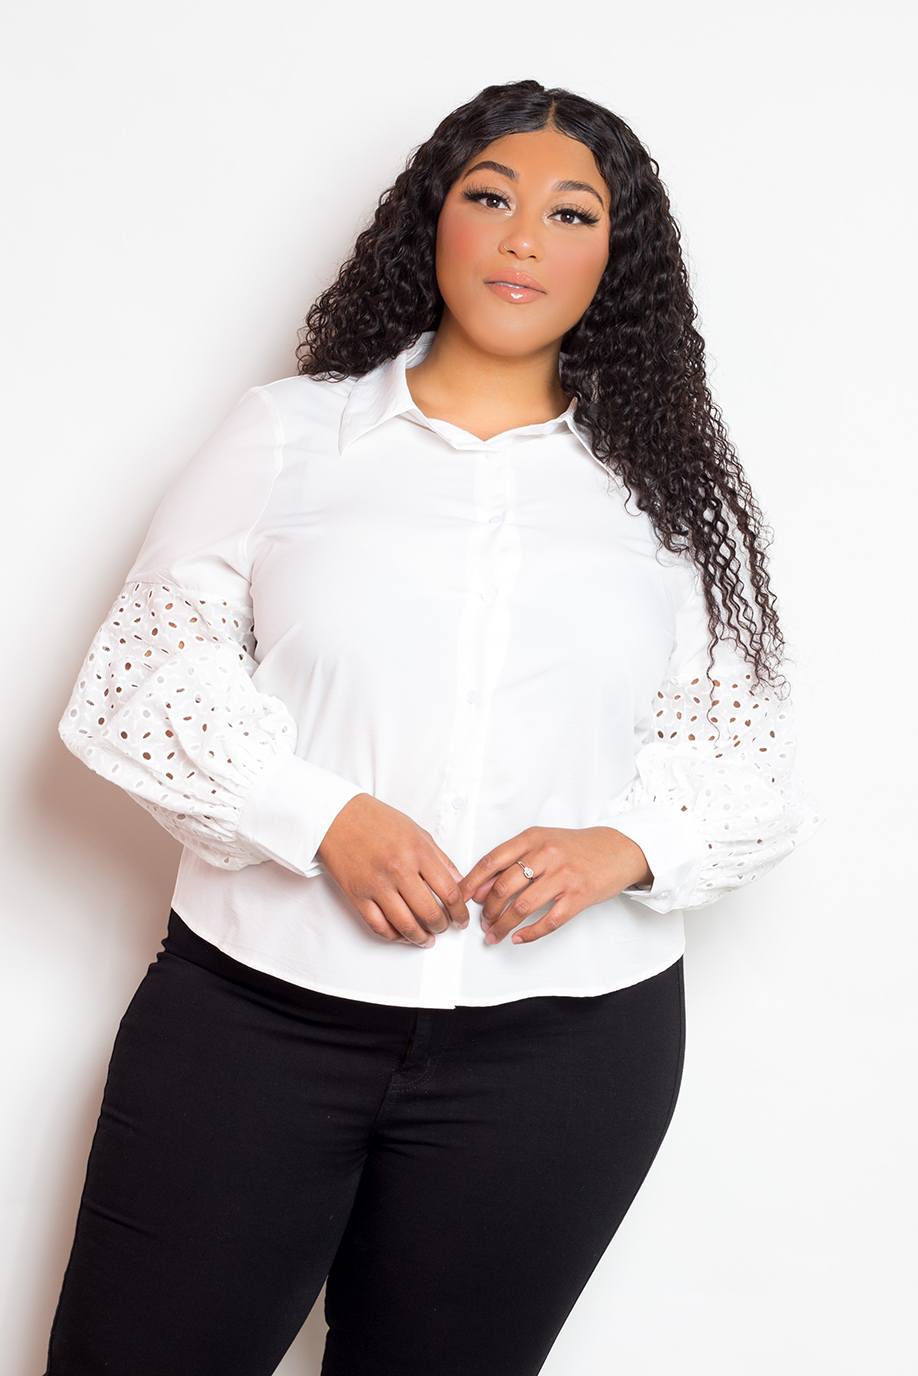 PLUS SIZE Blouse With Punched Sleeves - Multiple Colors